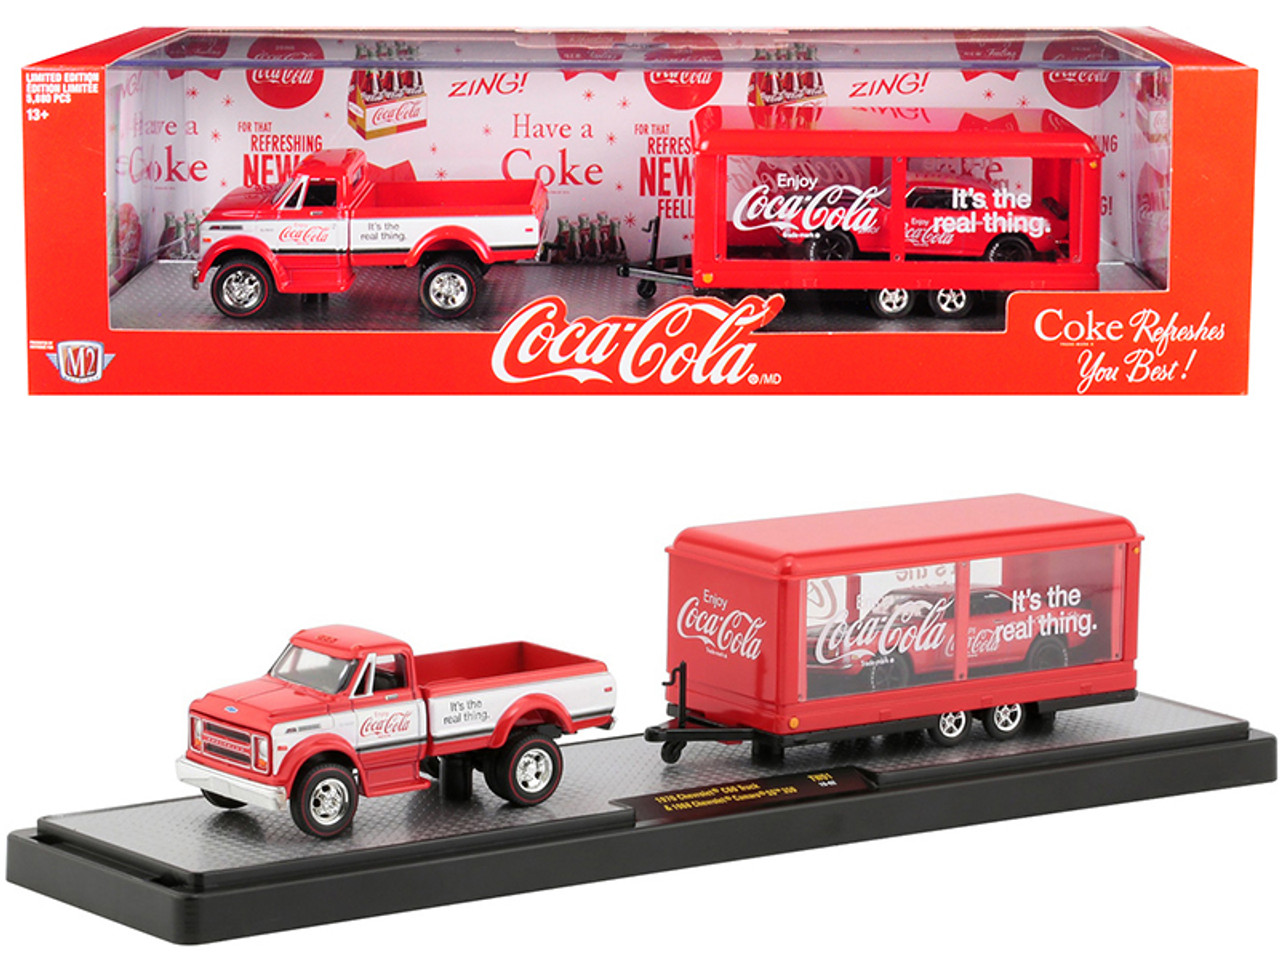 1970 Chevrolet C60 Pickup Truck Coke Red and White with Trailer and 1968 Chevrolet Camaro SS 350 Coke Red with Black Hood "Coca-Cola" Set Limited Edition to 5880 pieces Worldwide 1/64 Diecast Models by M2 Machines